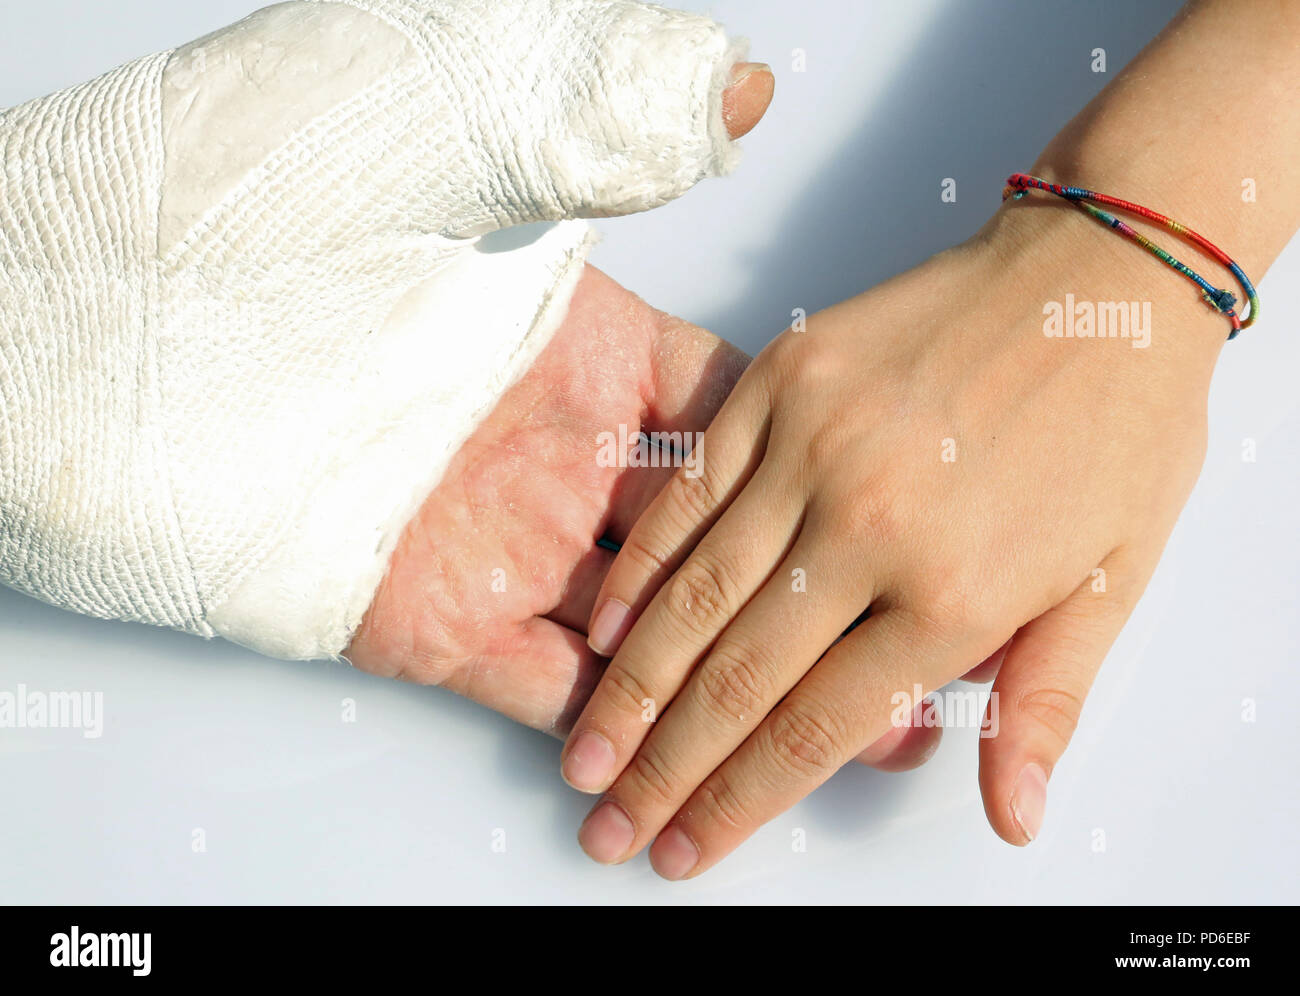 hand of the little girl who gently holds that of her dad after the serious accident and the cast of the fractured hand Stock Photo